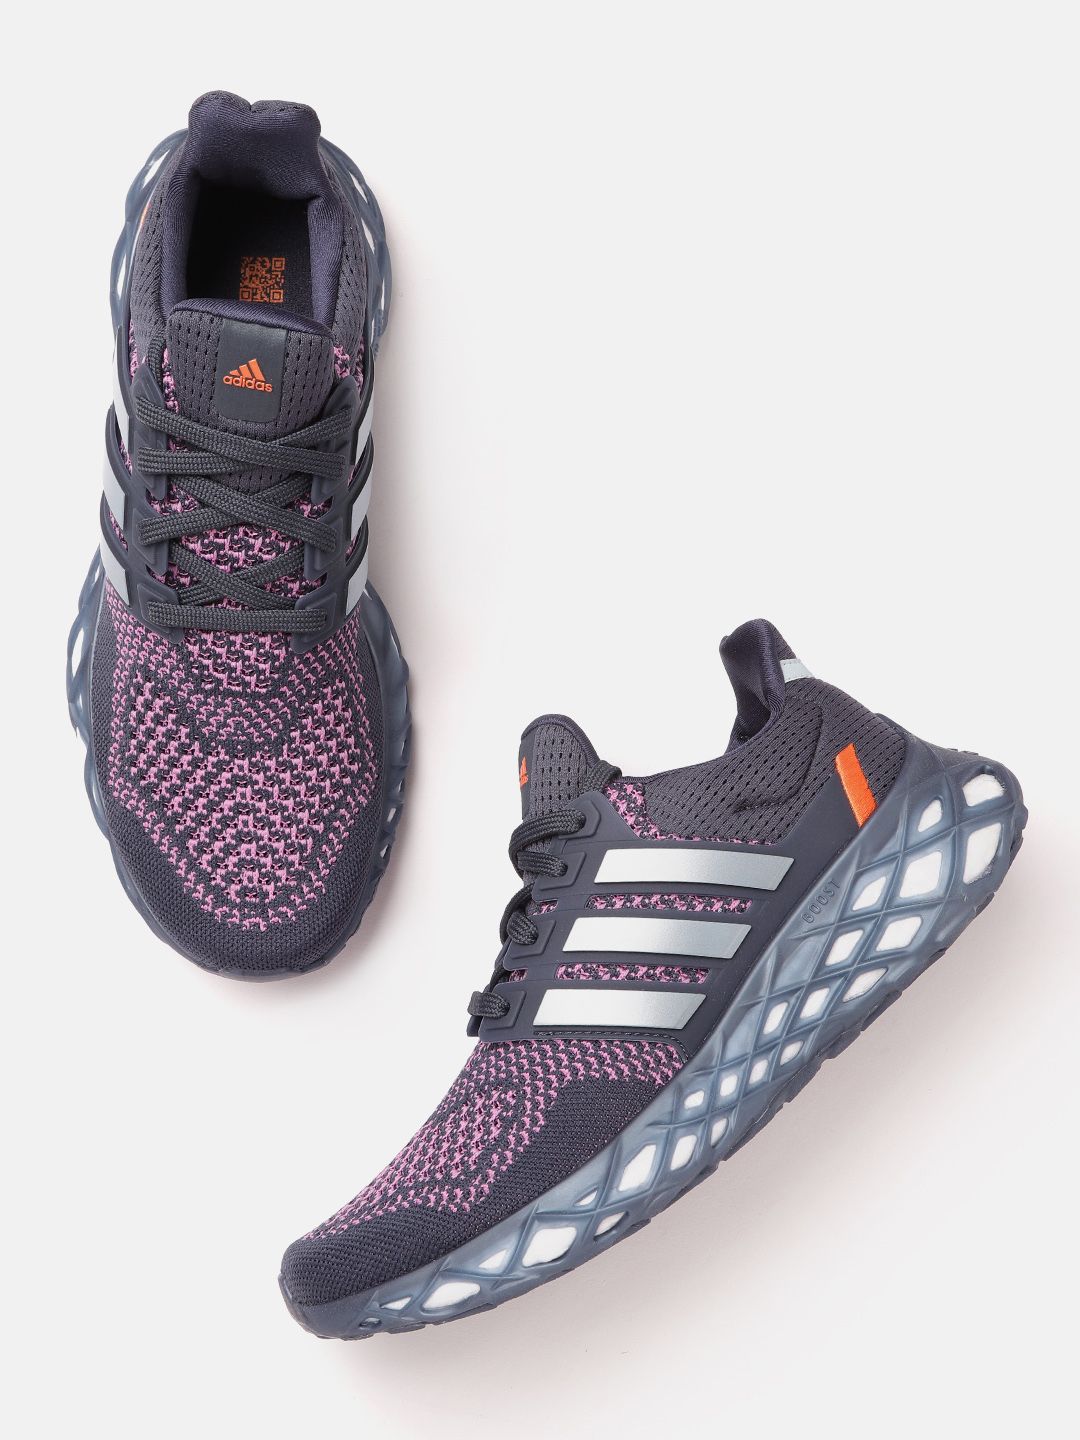 ADIDAS Unisex Navy Blue & Purple Woven Design Perforated Ultraboost Web Dna Running Shoes Price in India